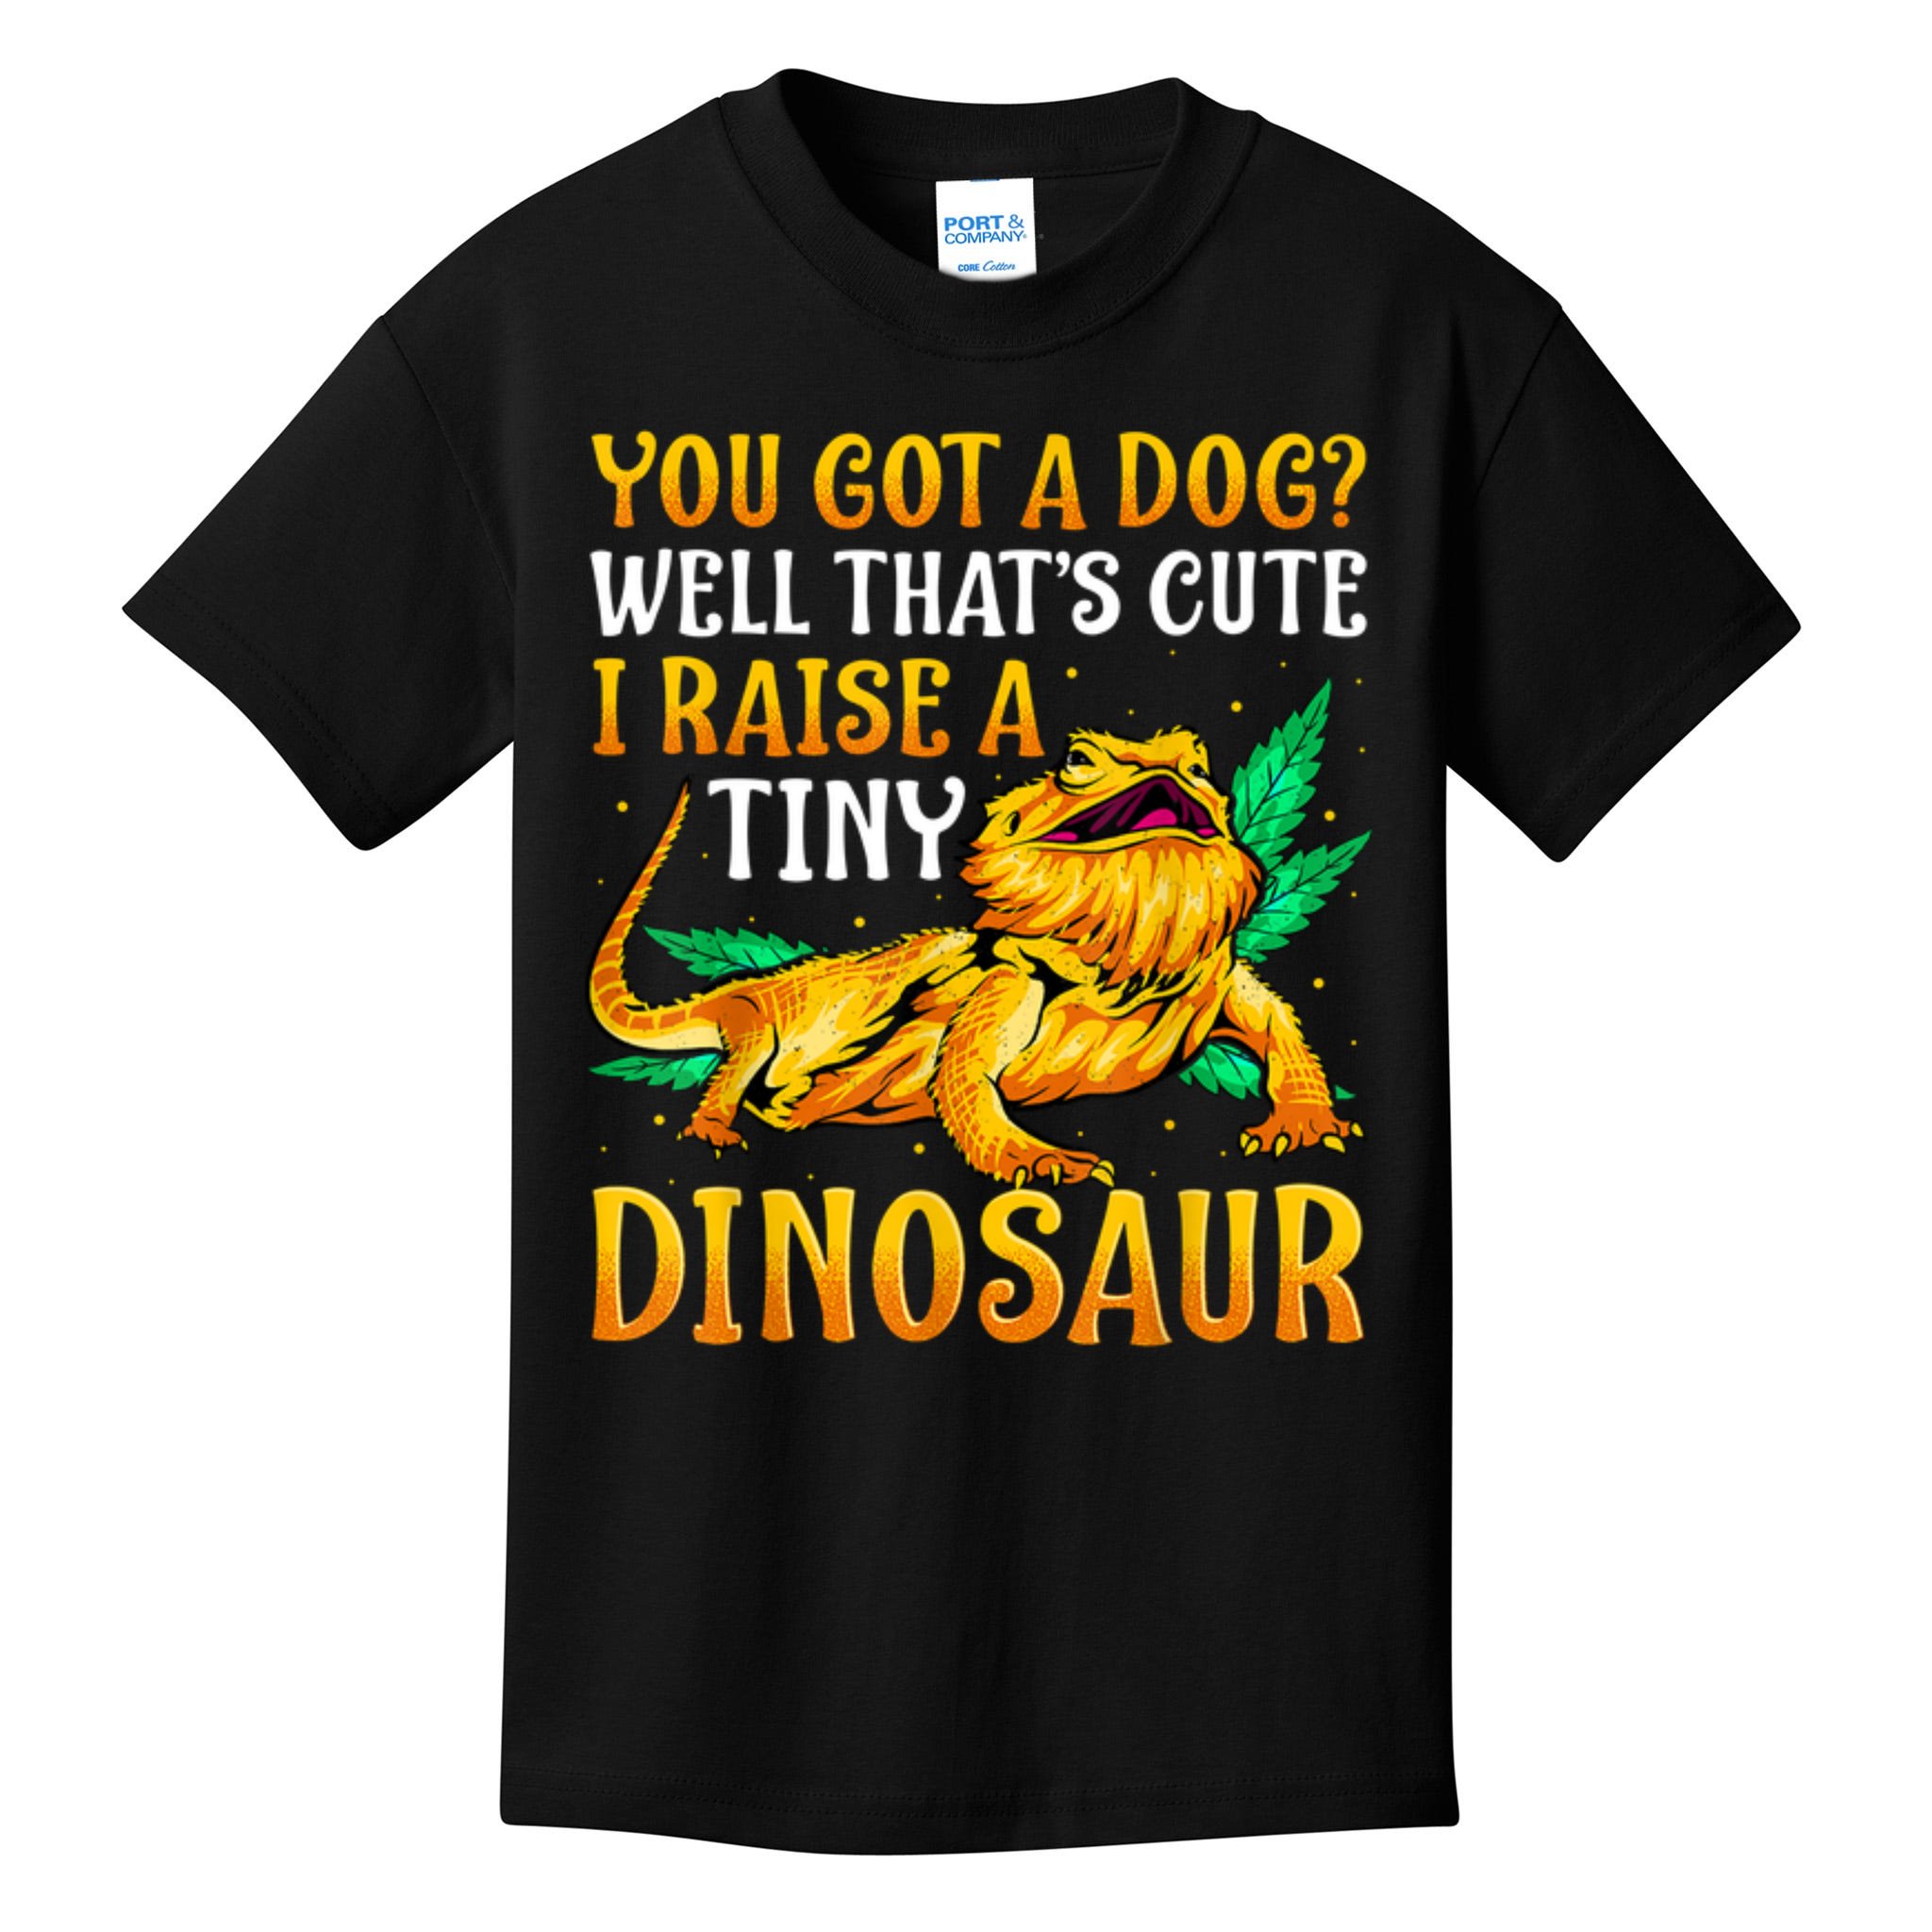 https://images3.teeshirtpalace.com/images/productImages/tbd1186541-the-bearded-dragon-shirt-pet-reptile-lizard-lover--black-yt-garment.jpg